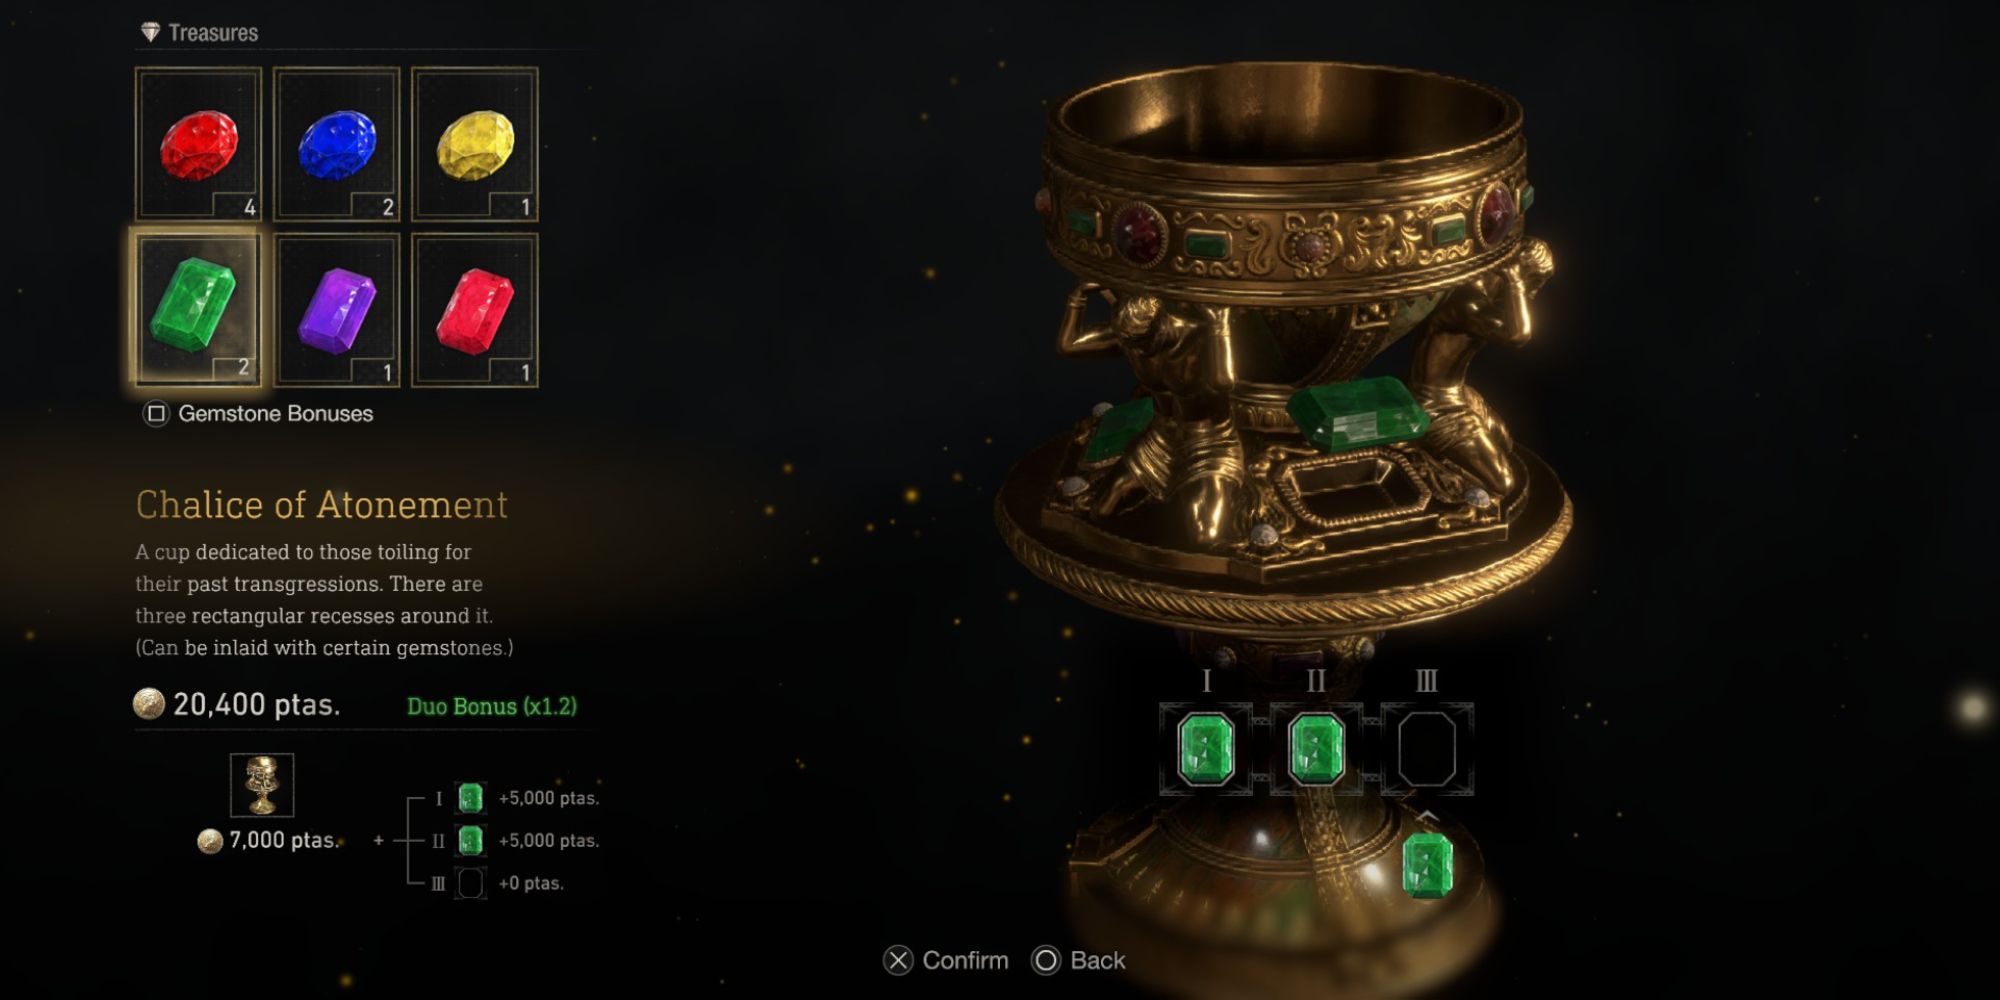 the chalice of atonement treasure in resident evil 4 remake, inlaid with emeralds